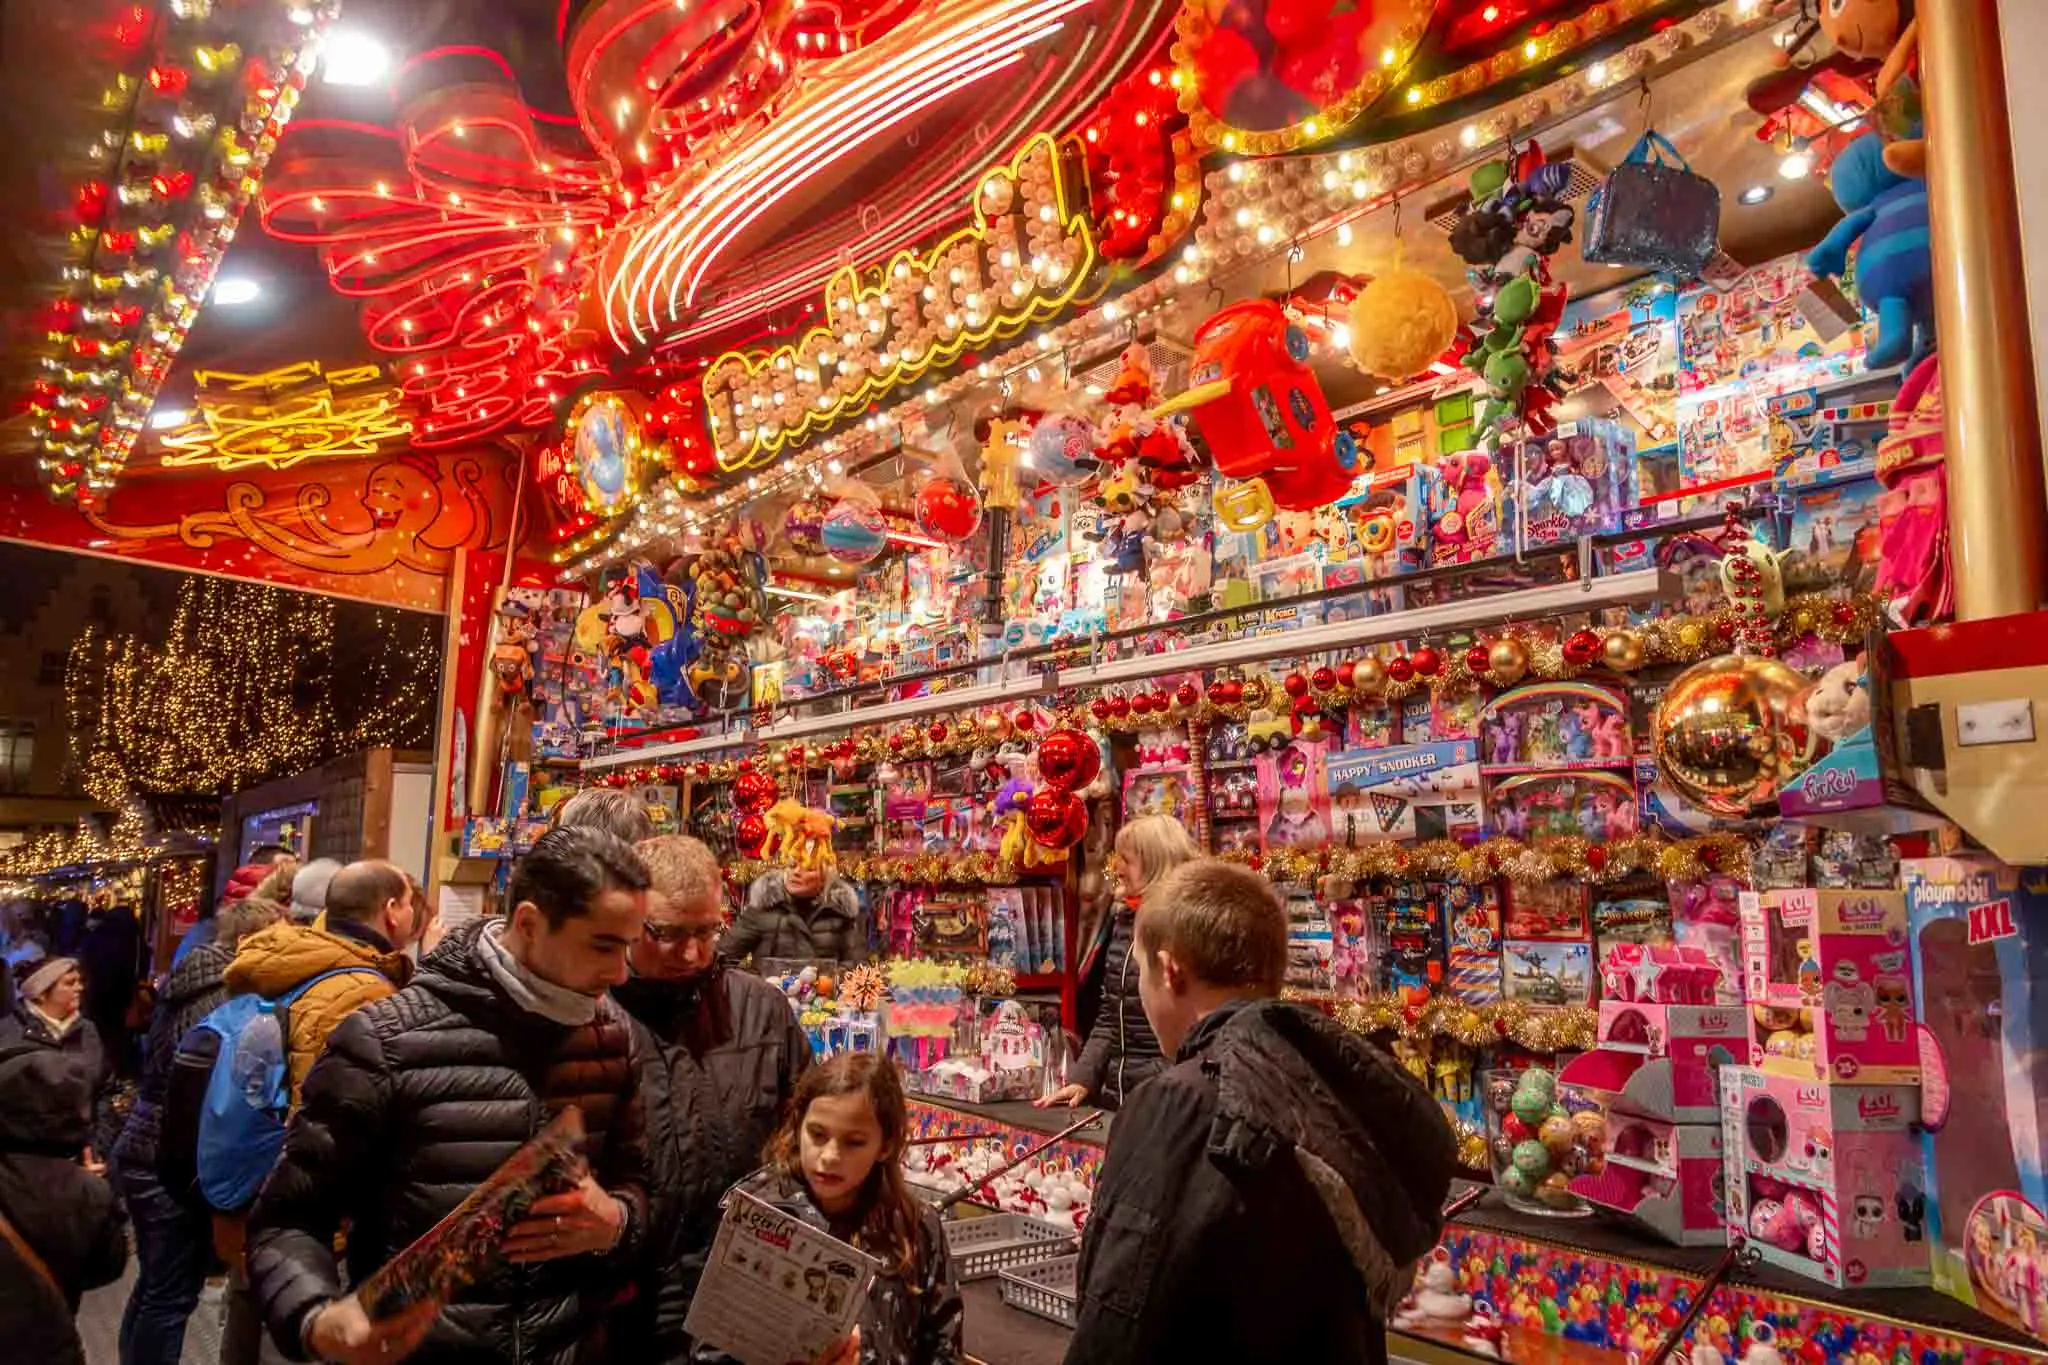 People shopping for toys at a brightly lit kiosk